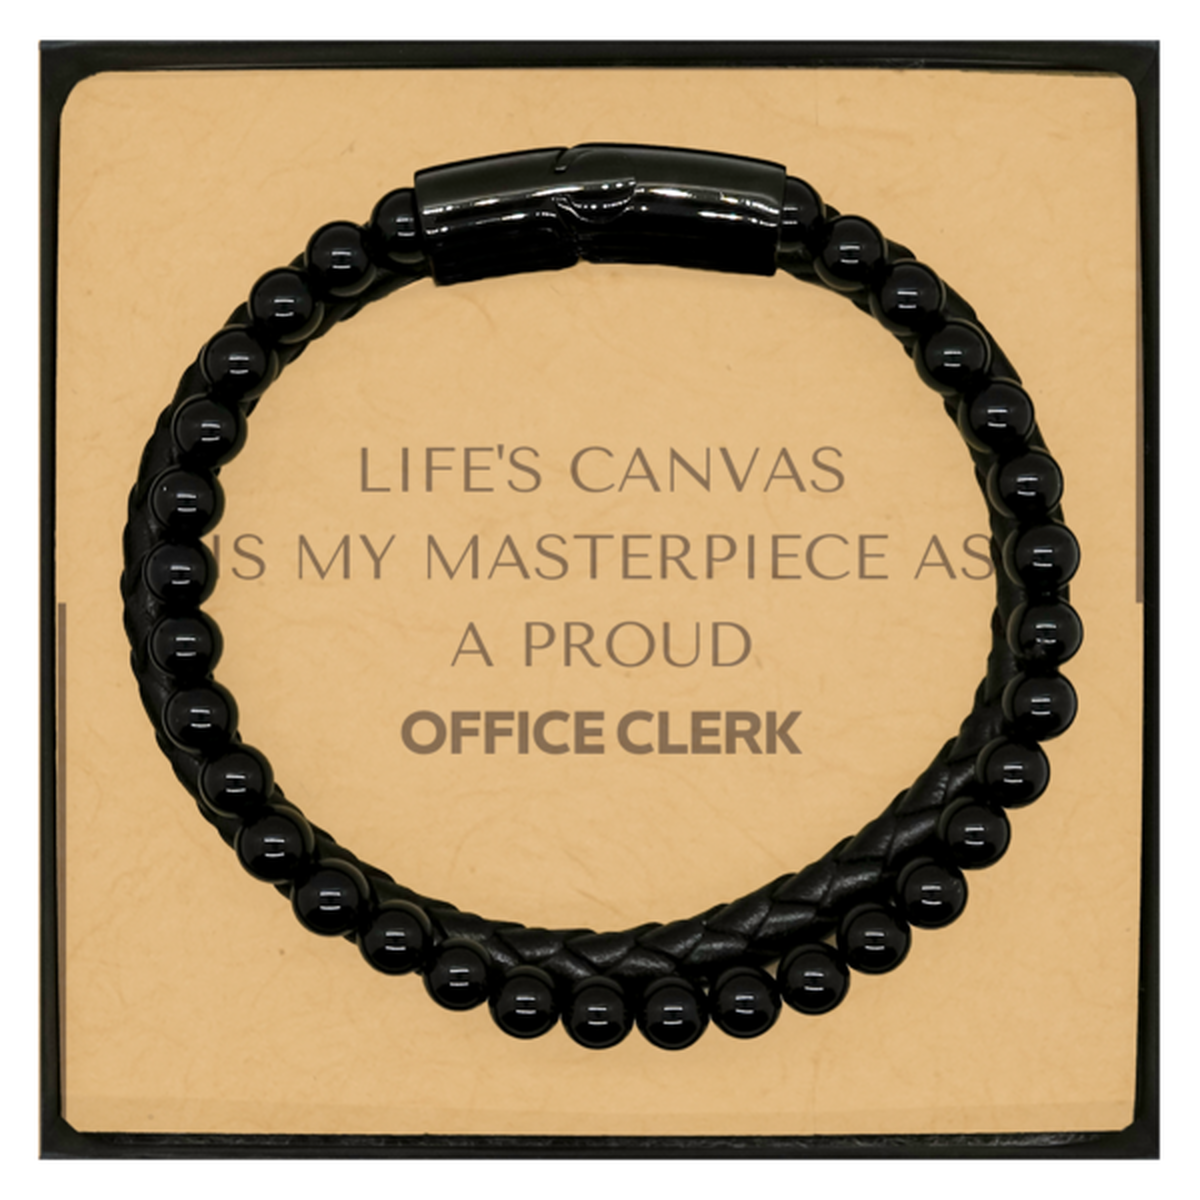 Proud Office Clerk Gifts, Life's canvas is my masterpiece, Epic Birthday Christmas Unique Stone Leather Bracelets For Office Clerk, Coworkers, Men, Women, Friends